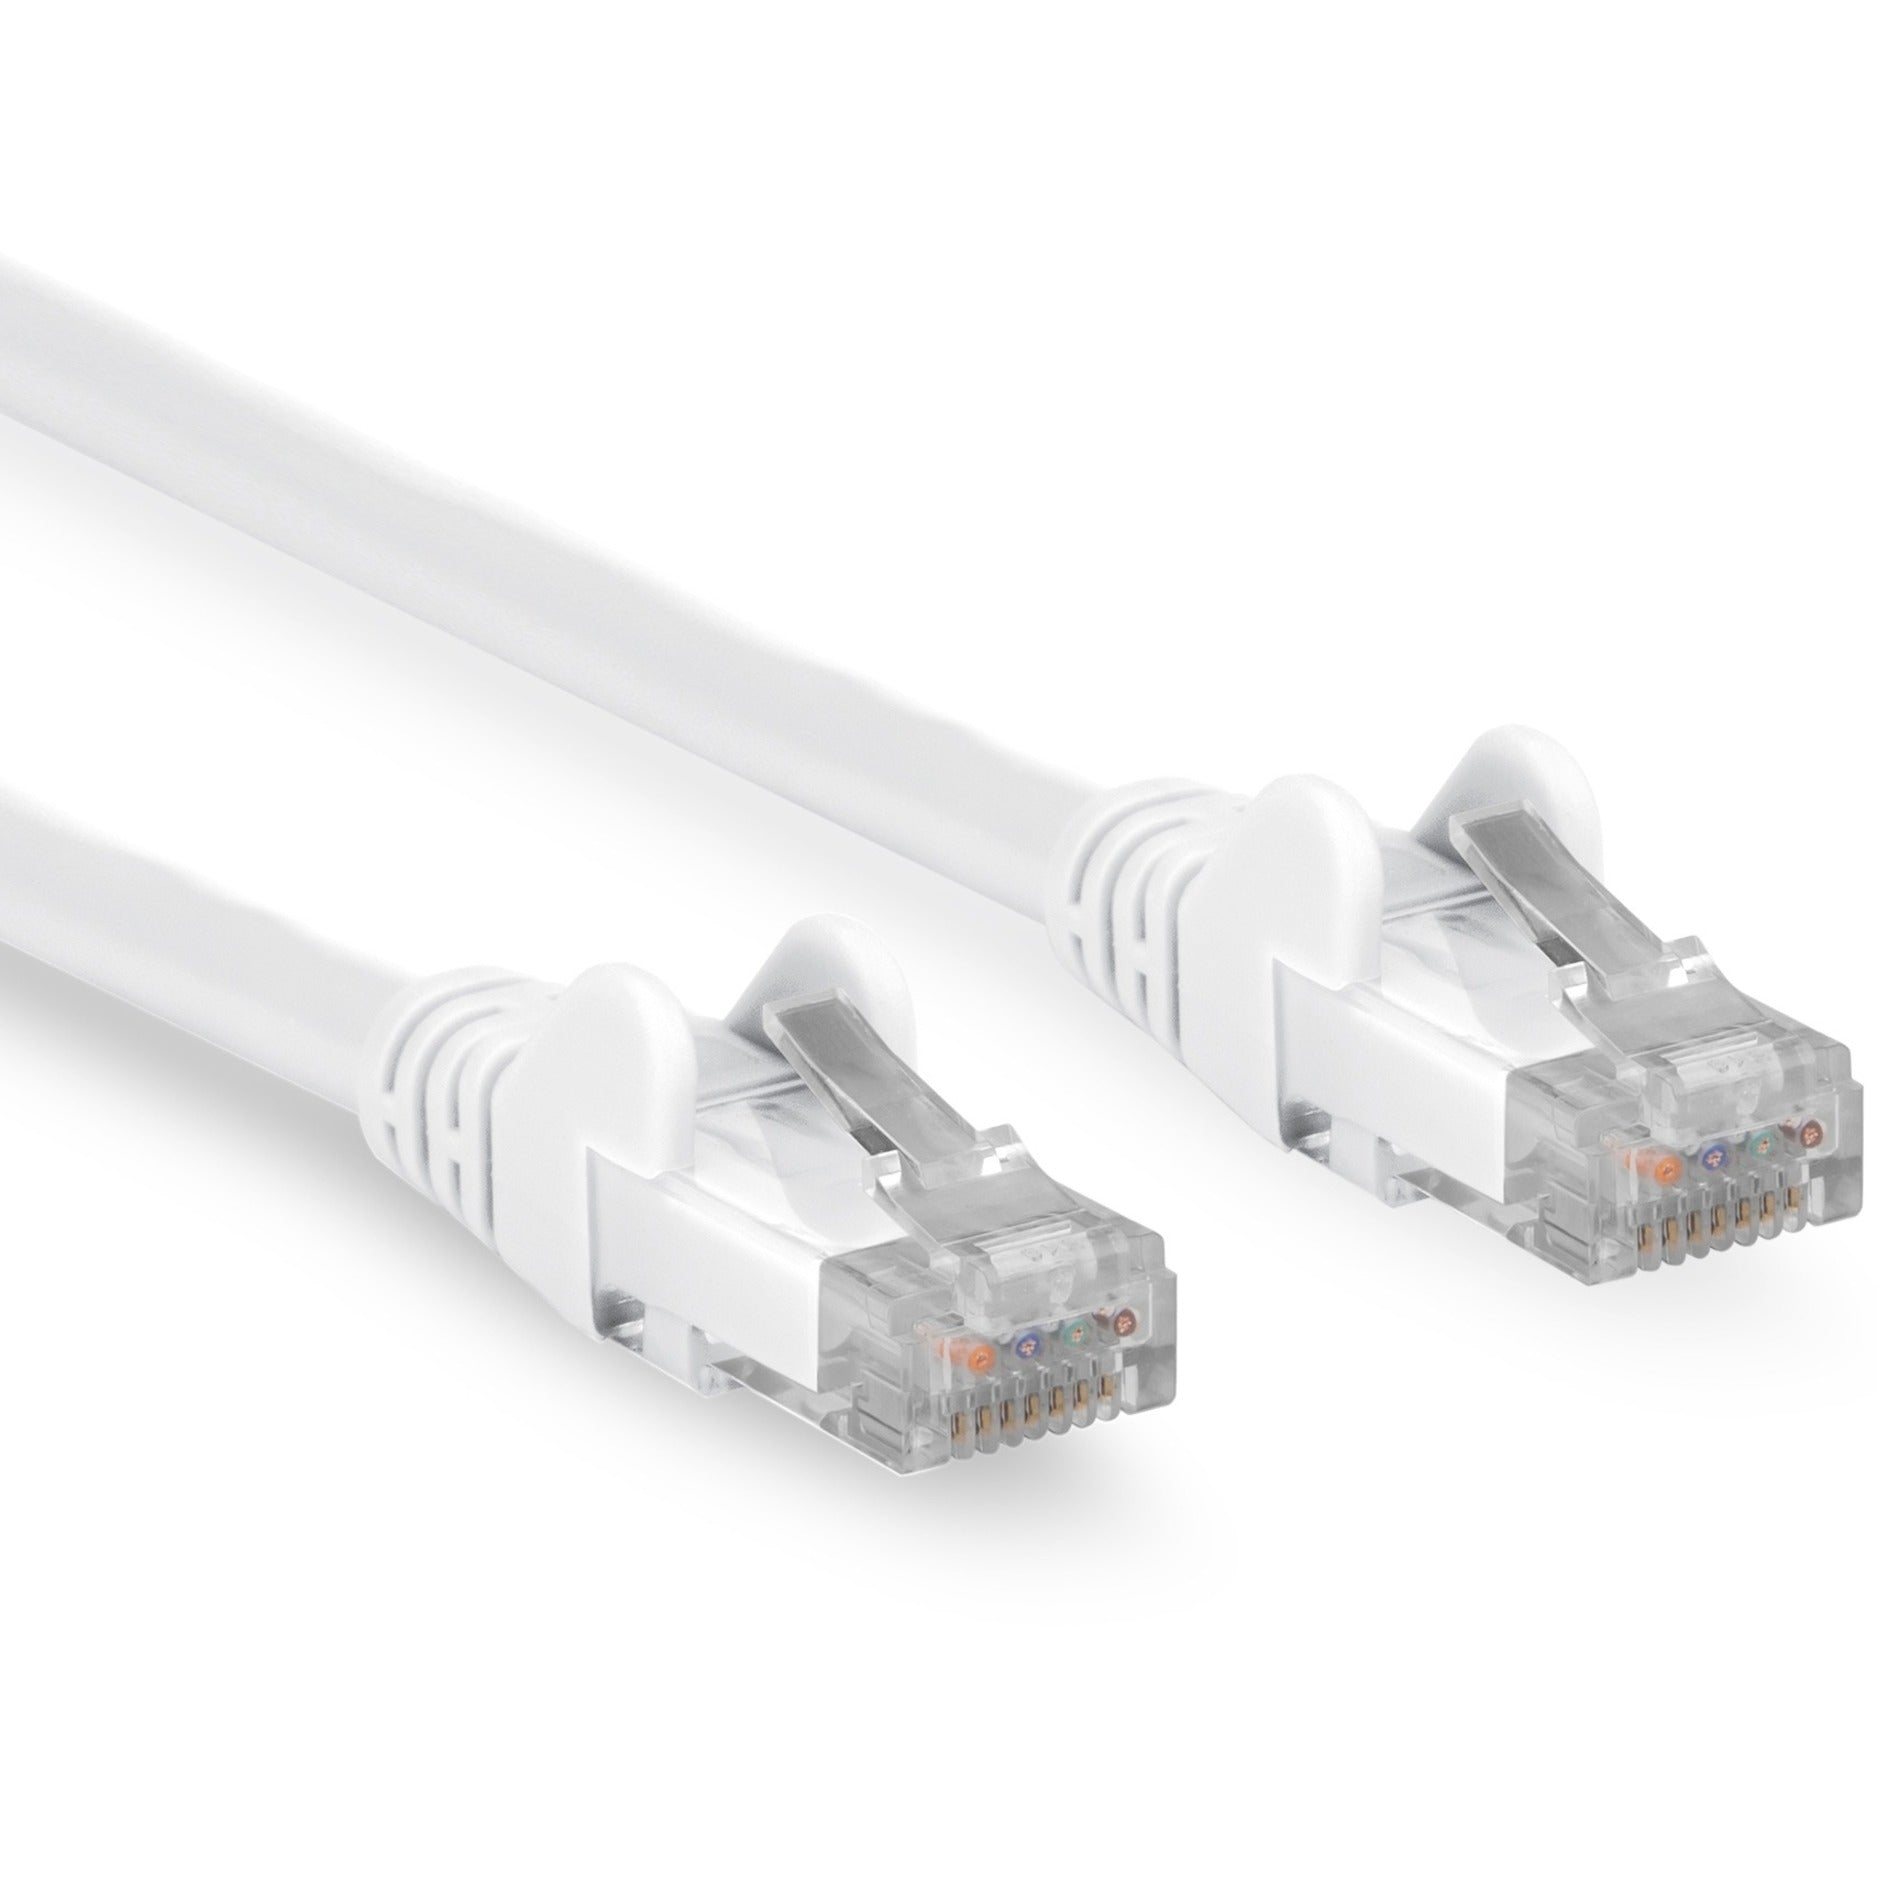 Rocstor Y10C373-WT Cat.6 Network Cable, 7 ft, Snagless, 10 Gbit/s, White